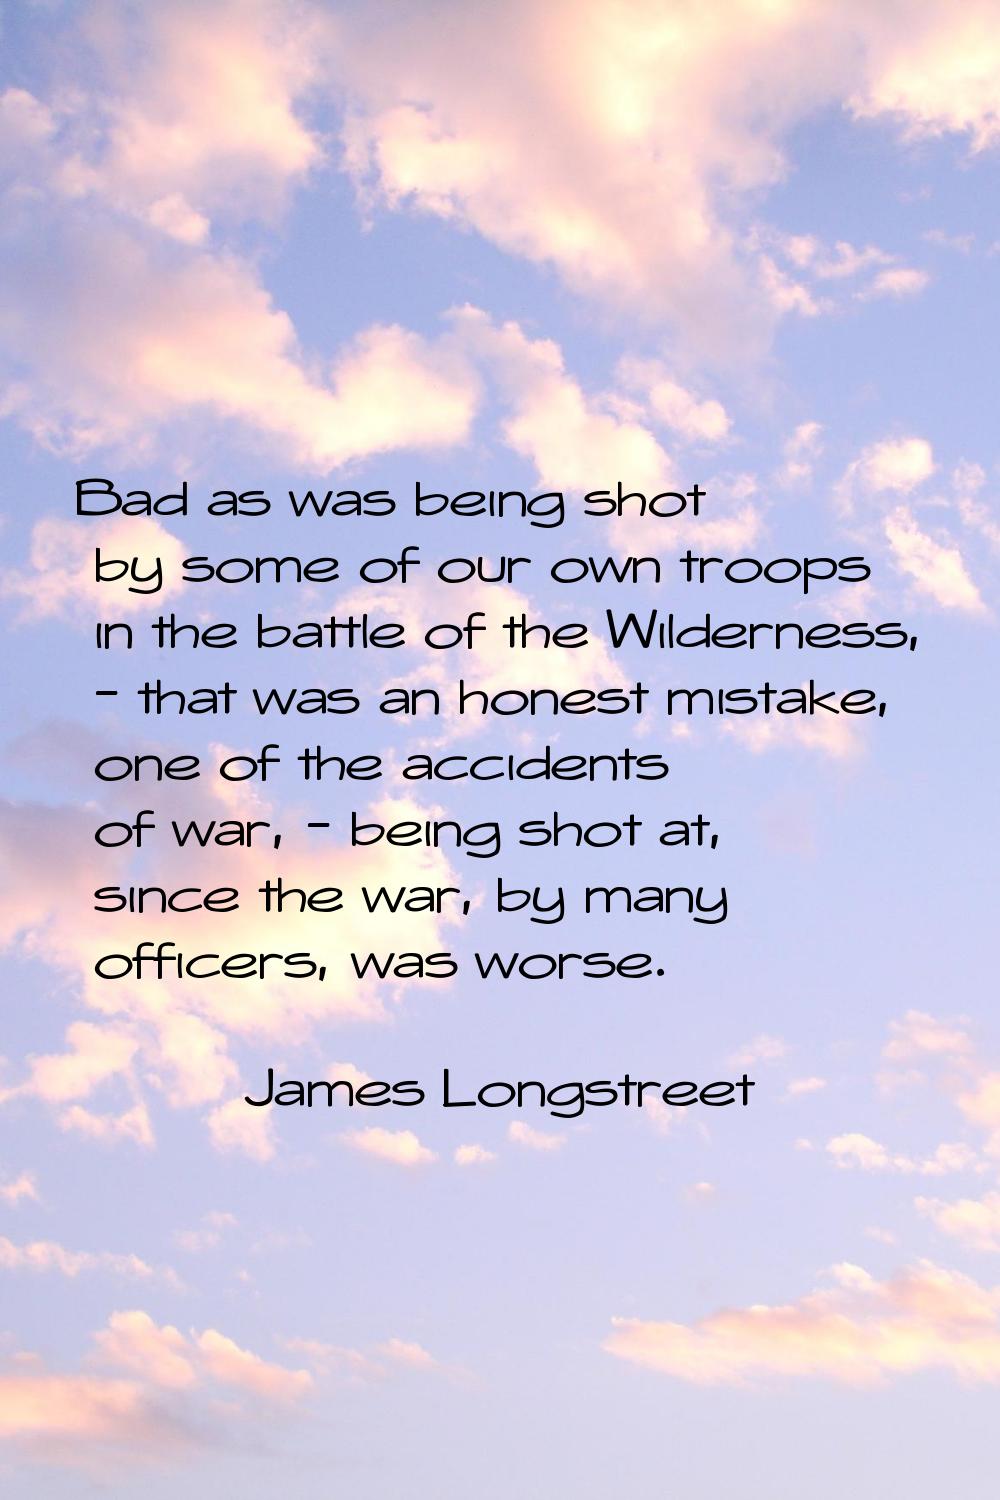 Bad as was being shot by some of our own troops in the battle of the Wilderness, - that was an hone